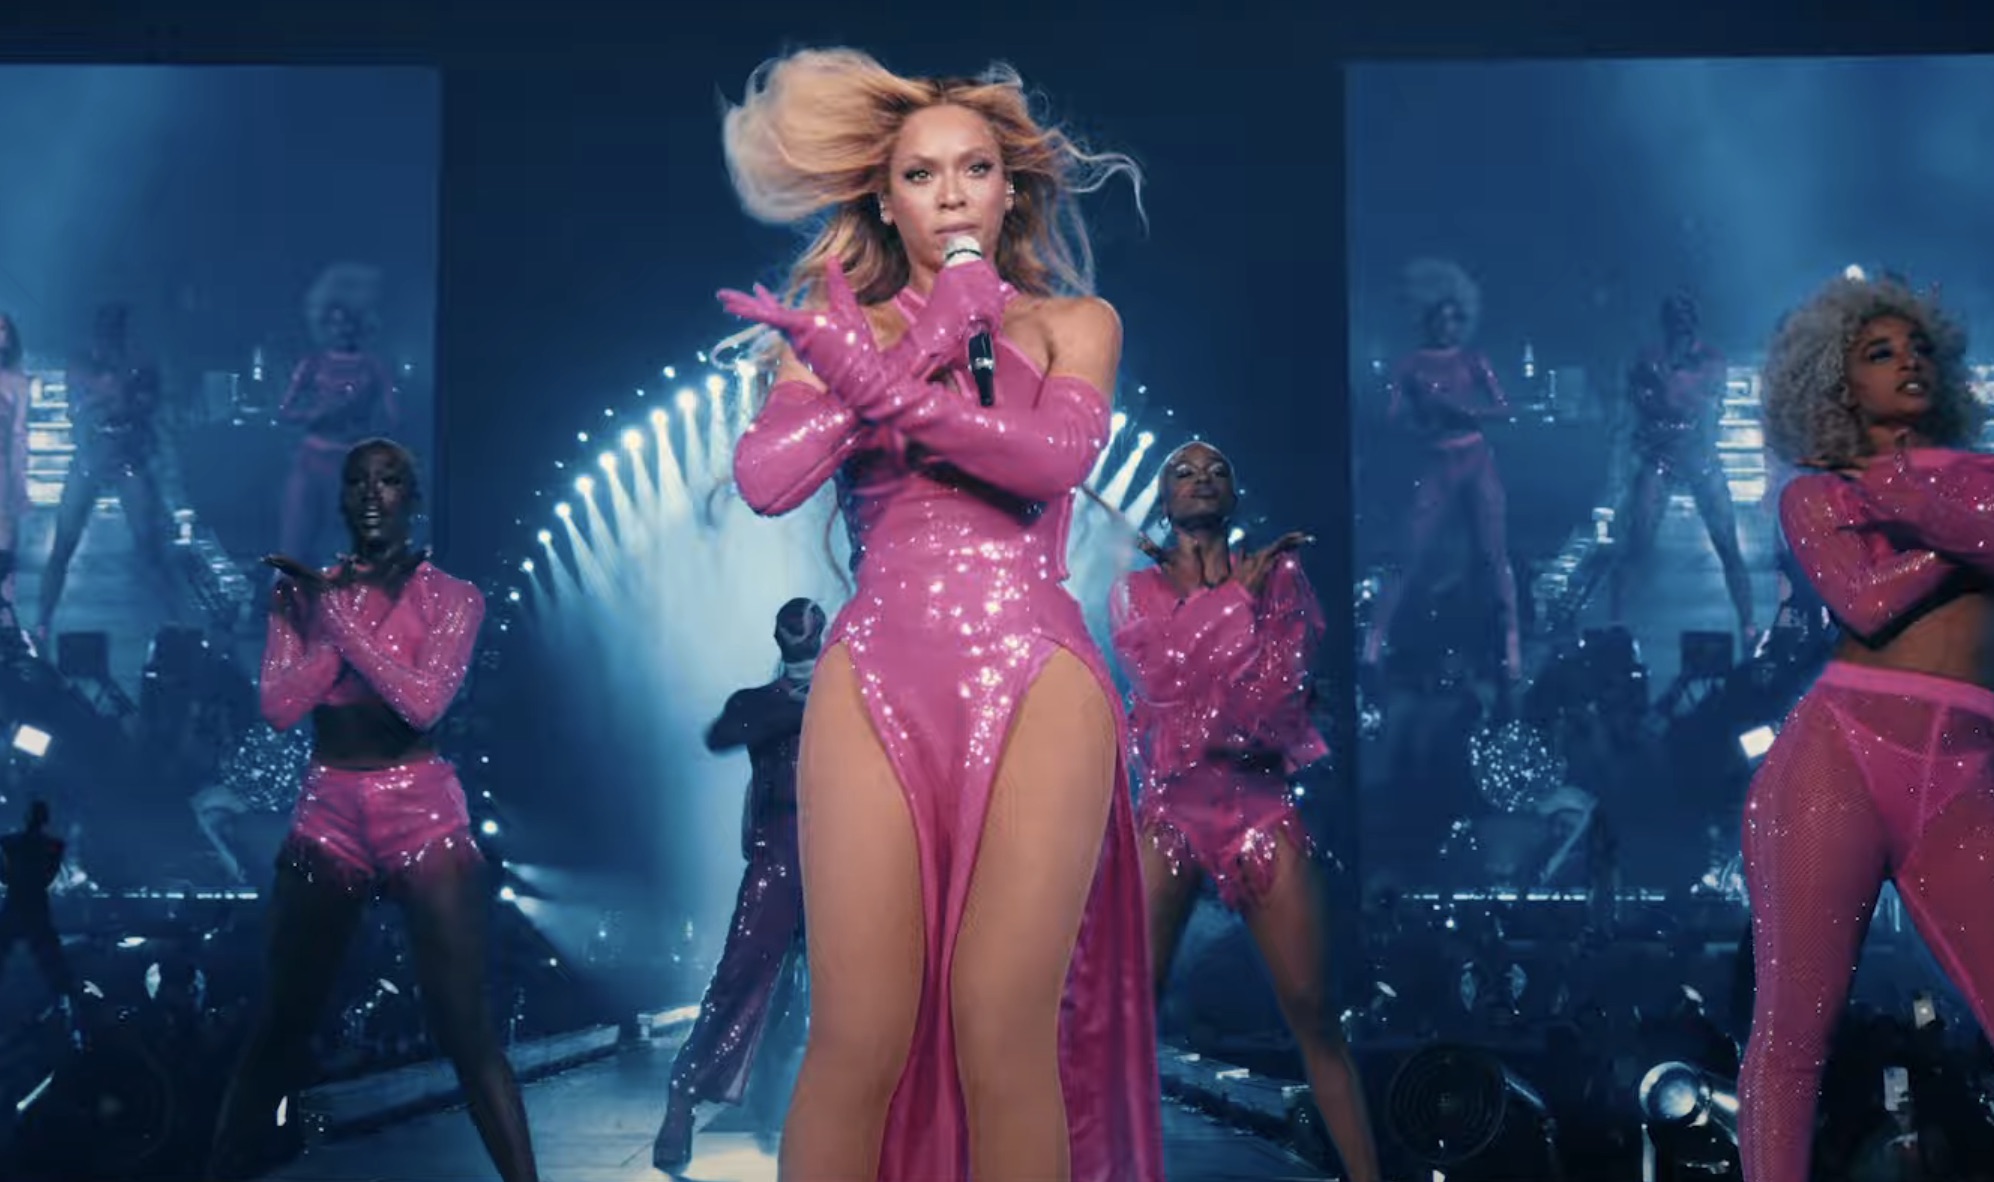 Beyonce Unleashes EPIC New Trailer for the ‘Renaissance’ Film Ahead of Global Release